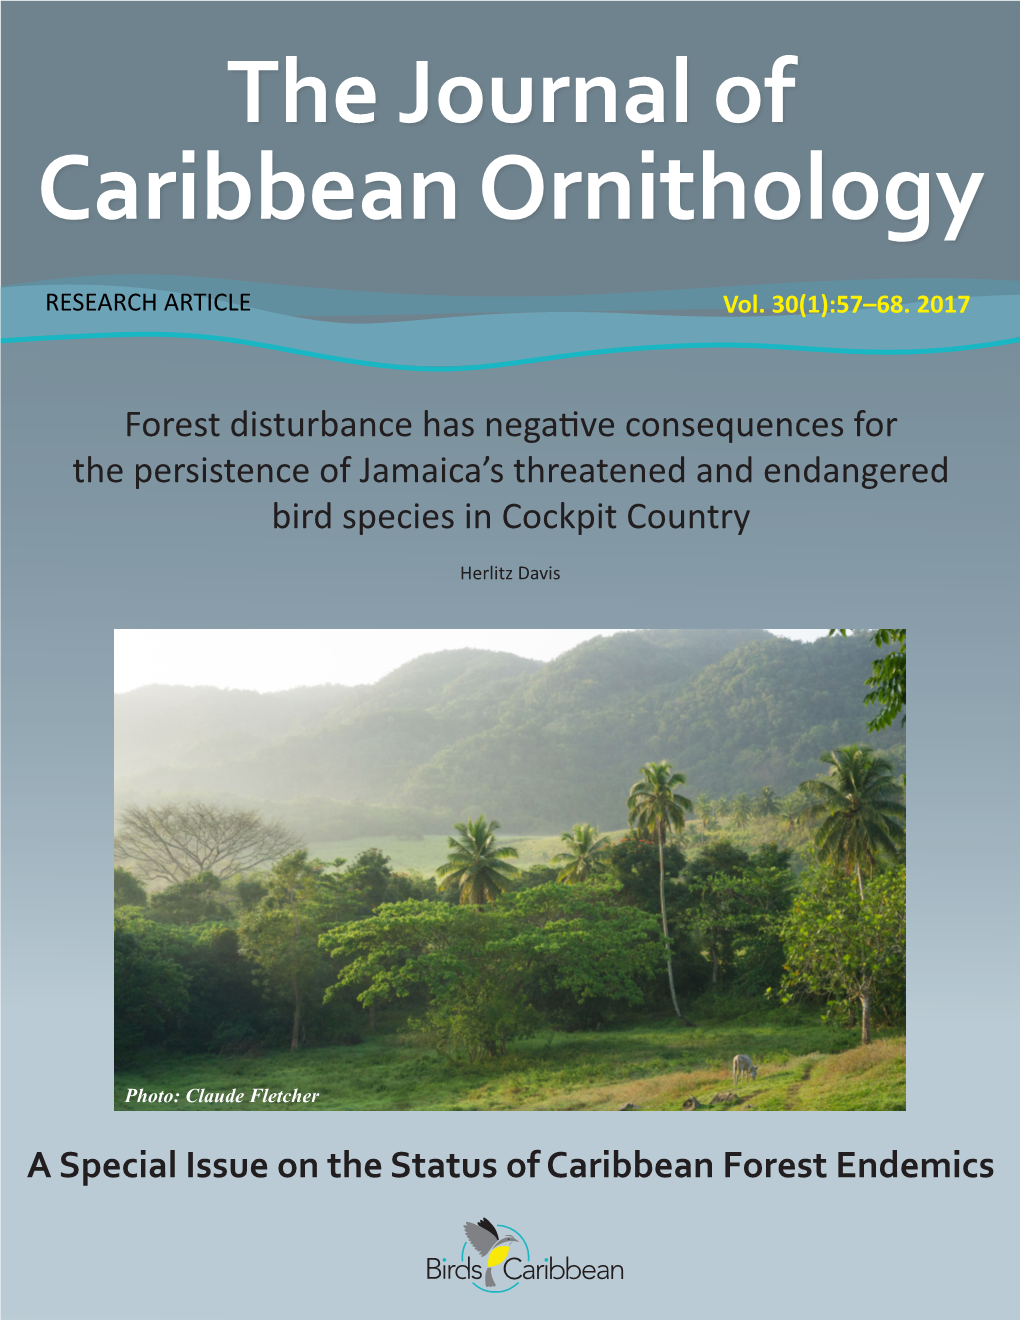 Forest Disturbance Has Negative Consequences for the Persistence of Jamaica’S Threatened and Endangered Bird Species in Cockpit Country